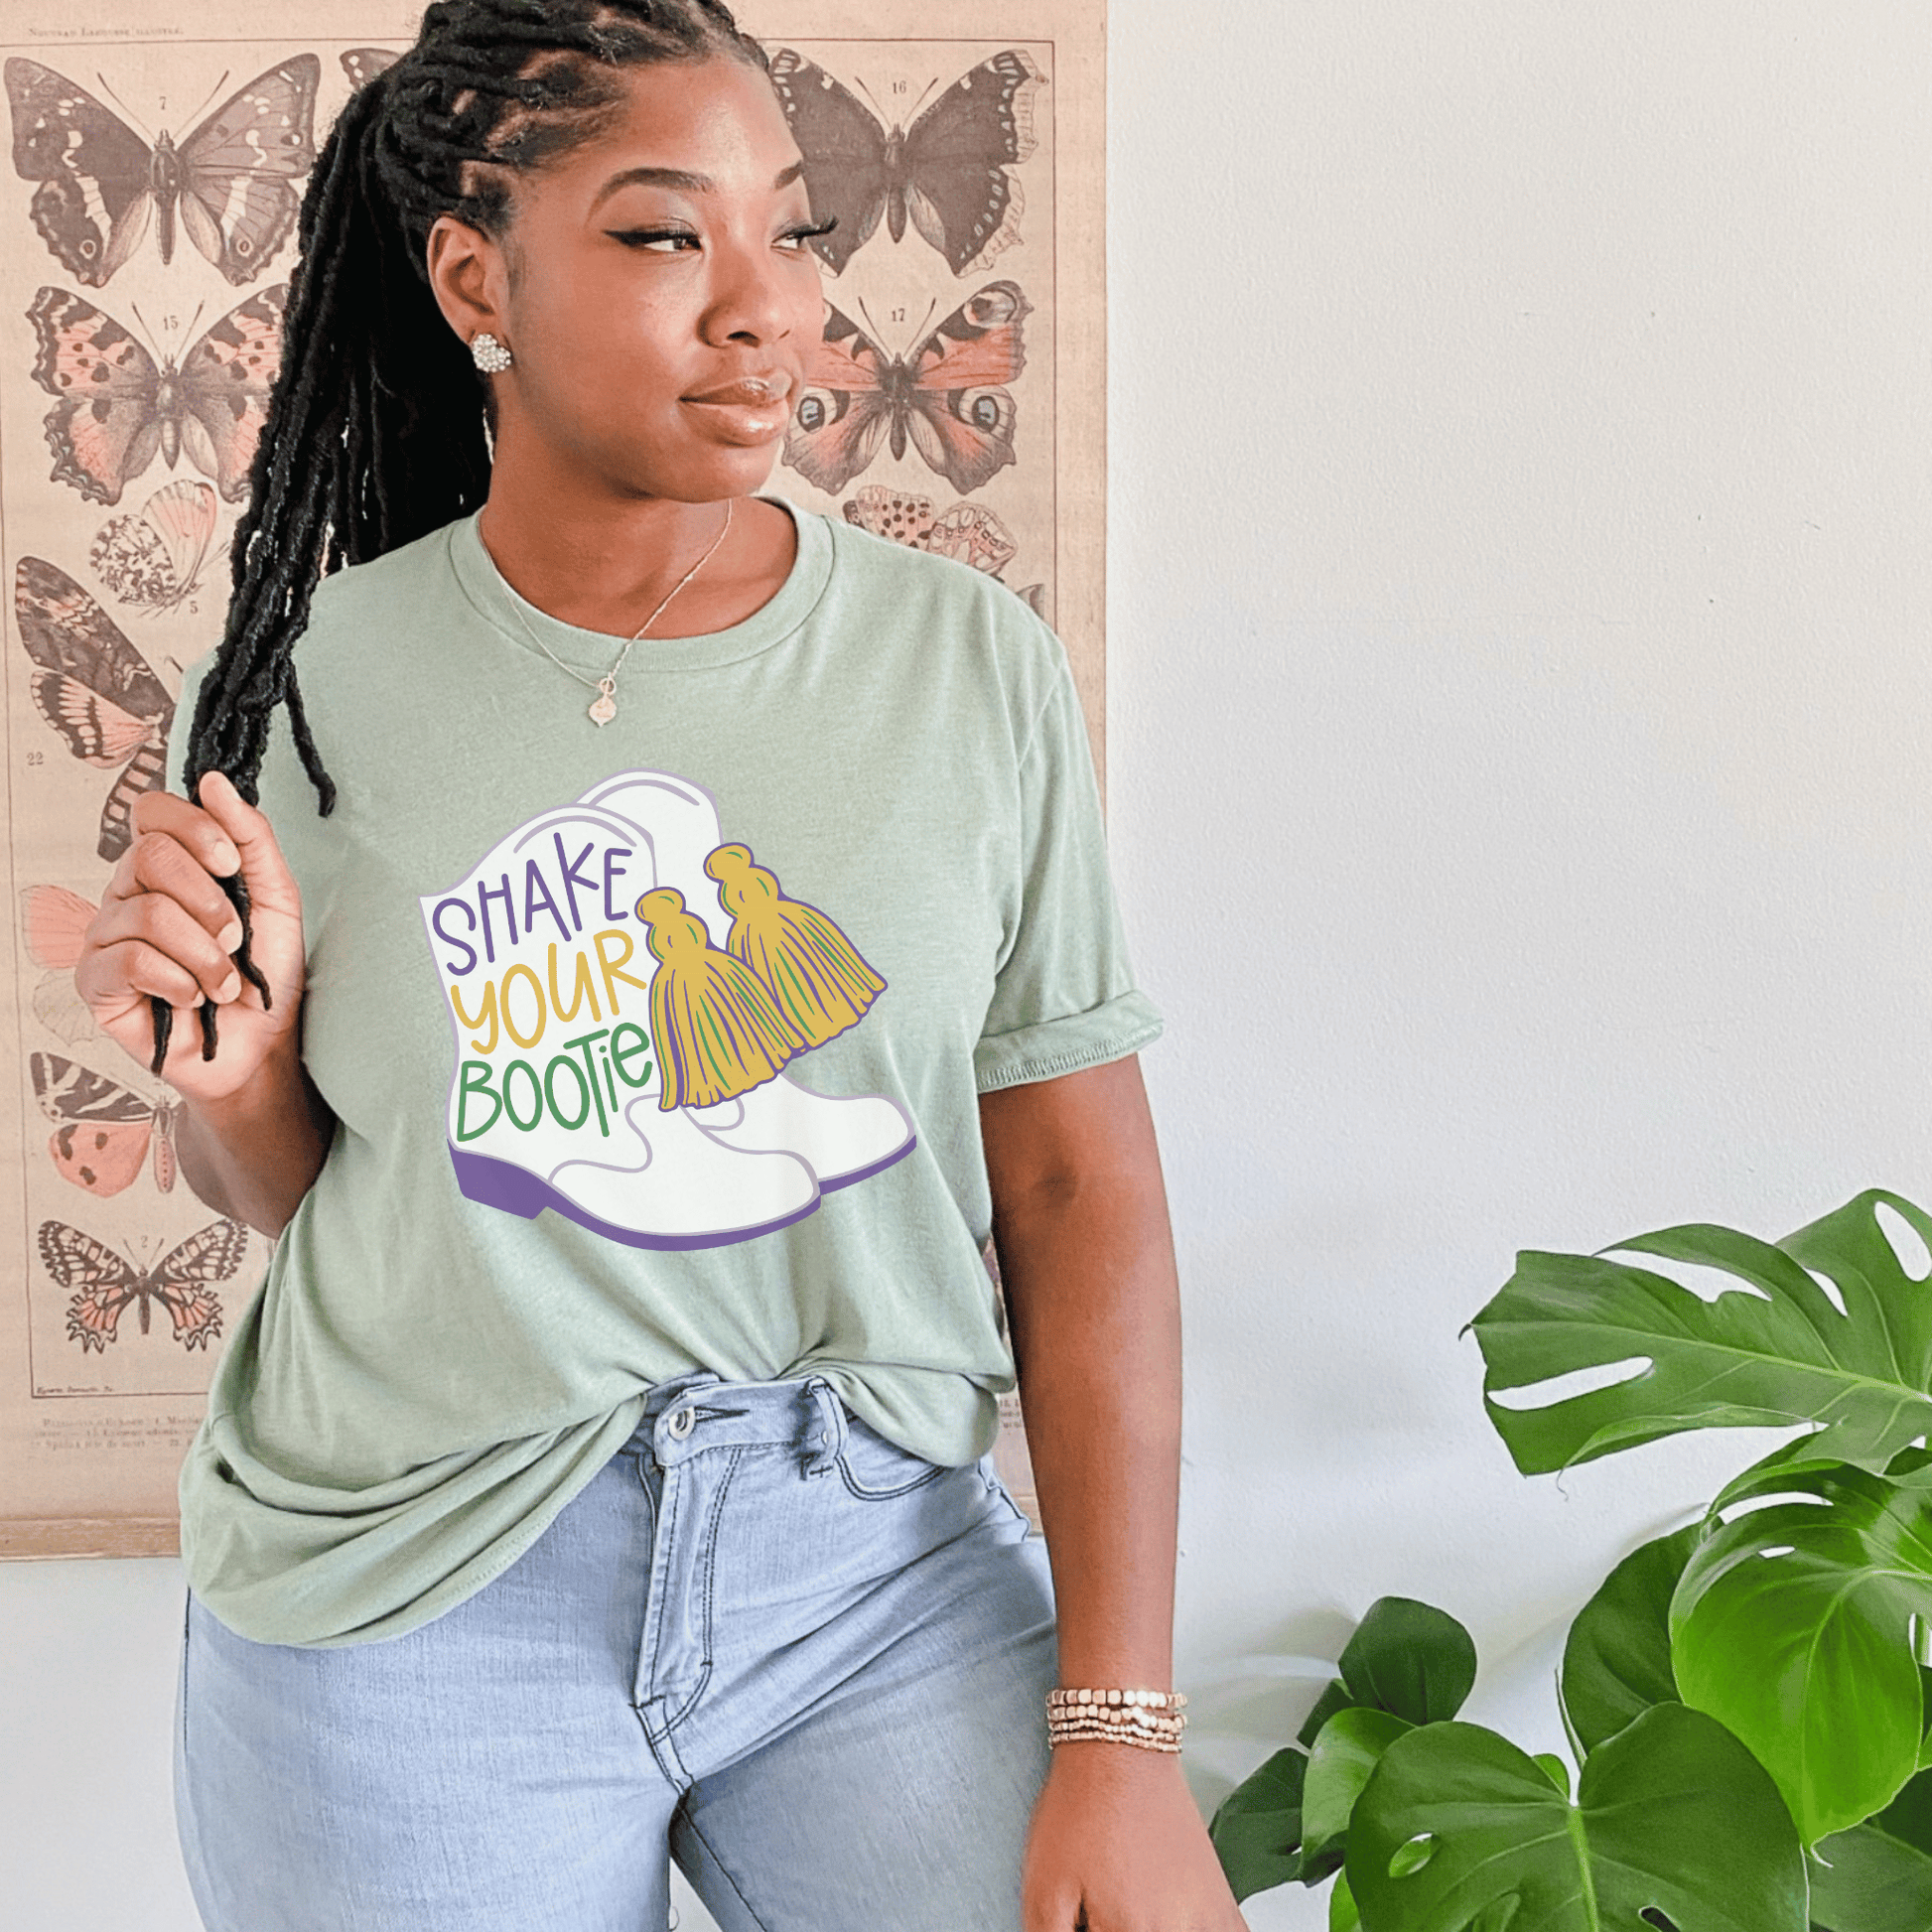 green mardi gras shirt that says shake your bootie featuring classic majorette boots